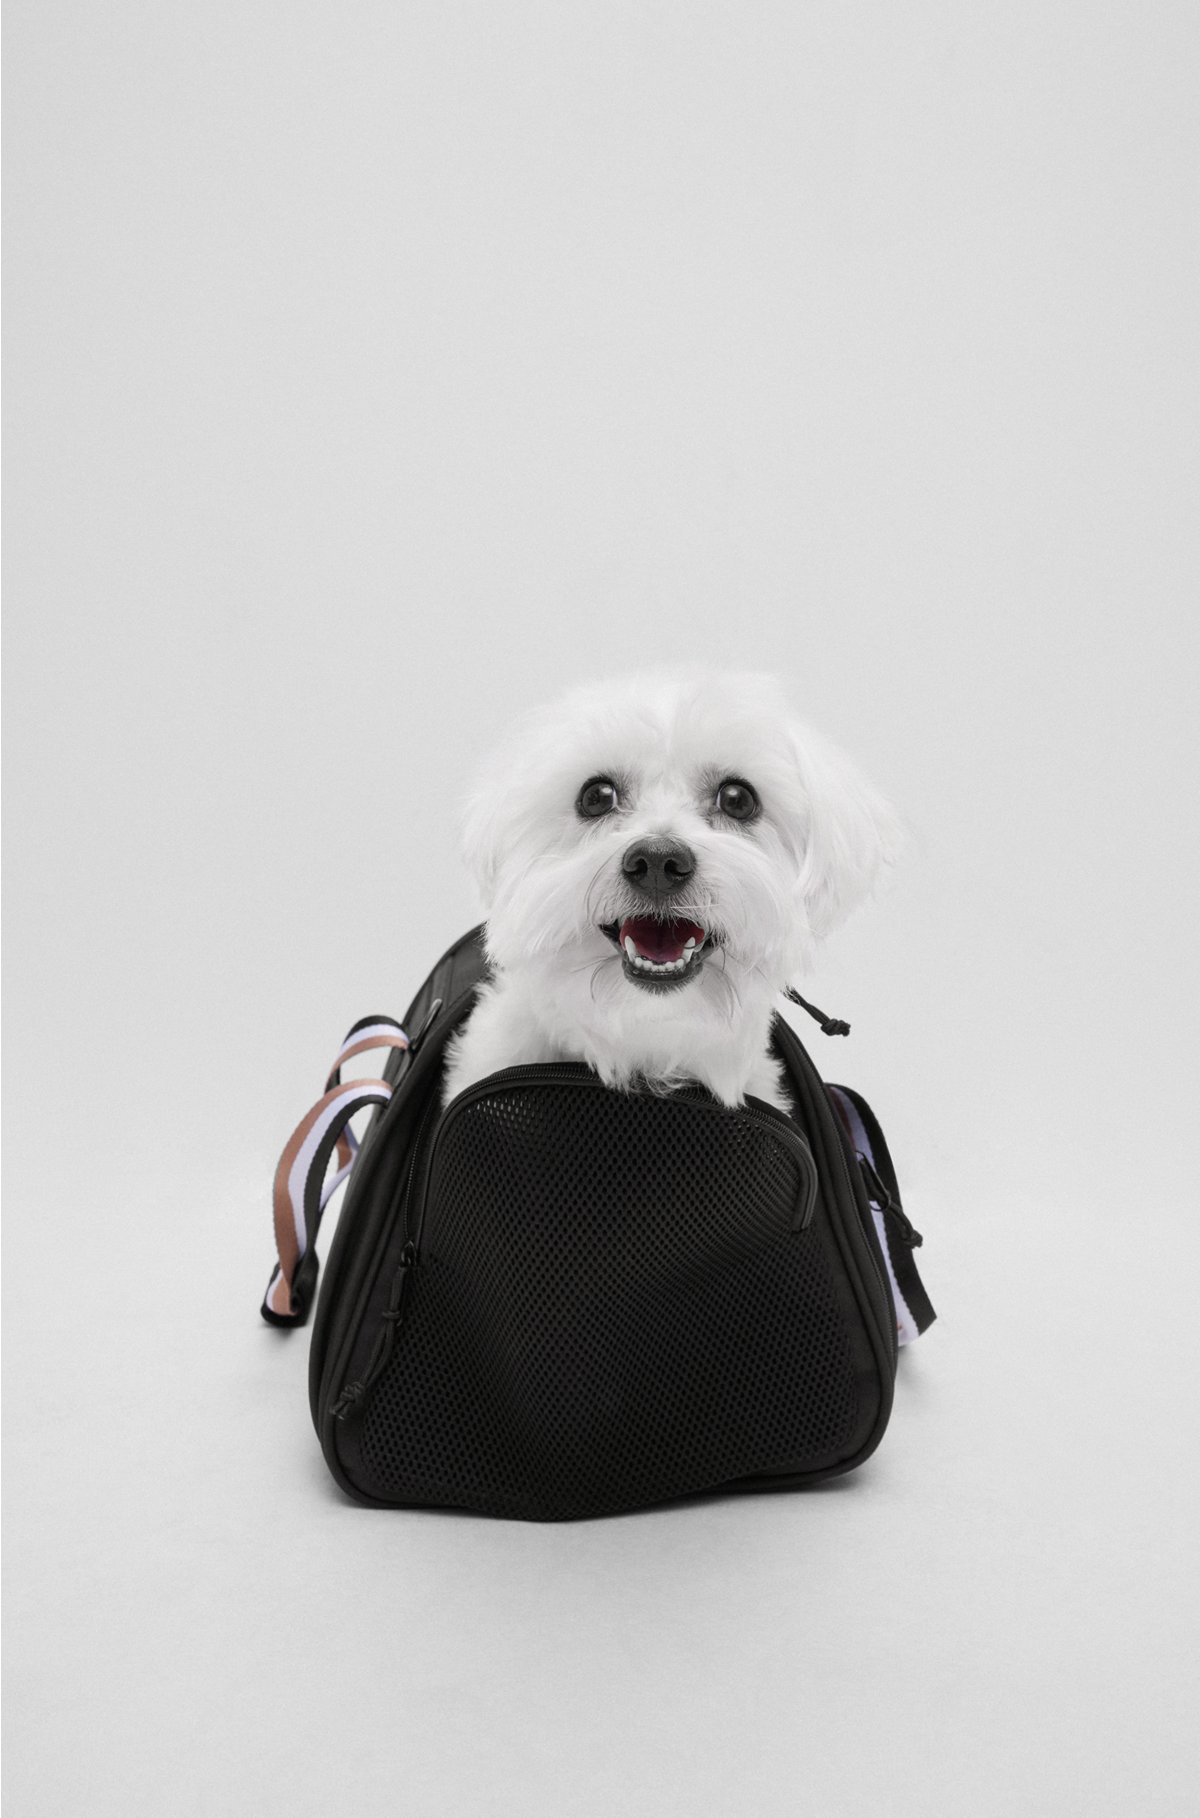 BOSS - Dog travel bag with quilted mat